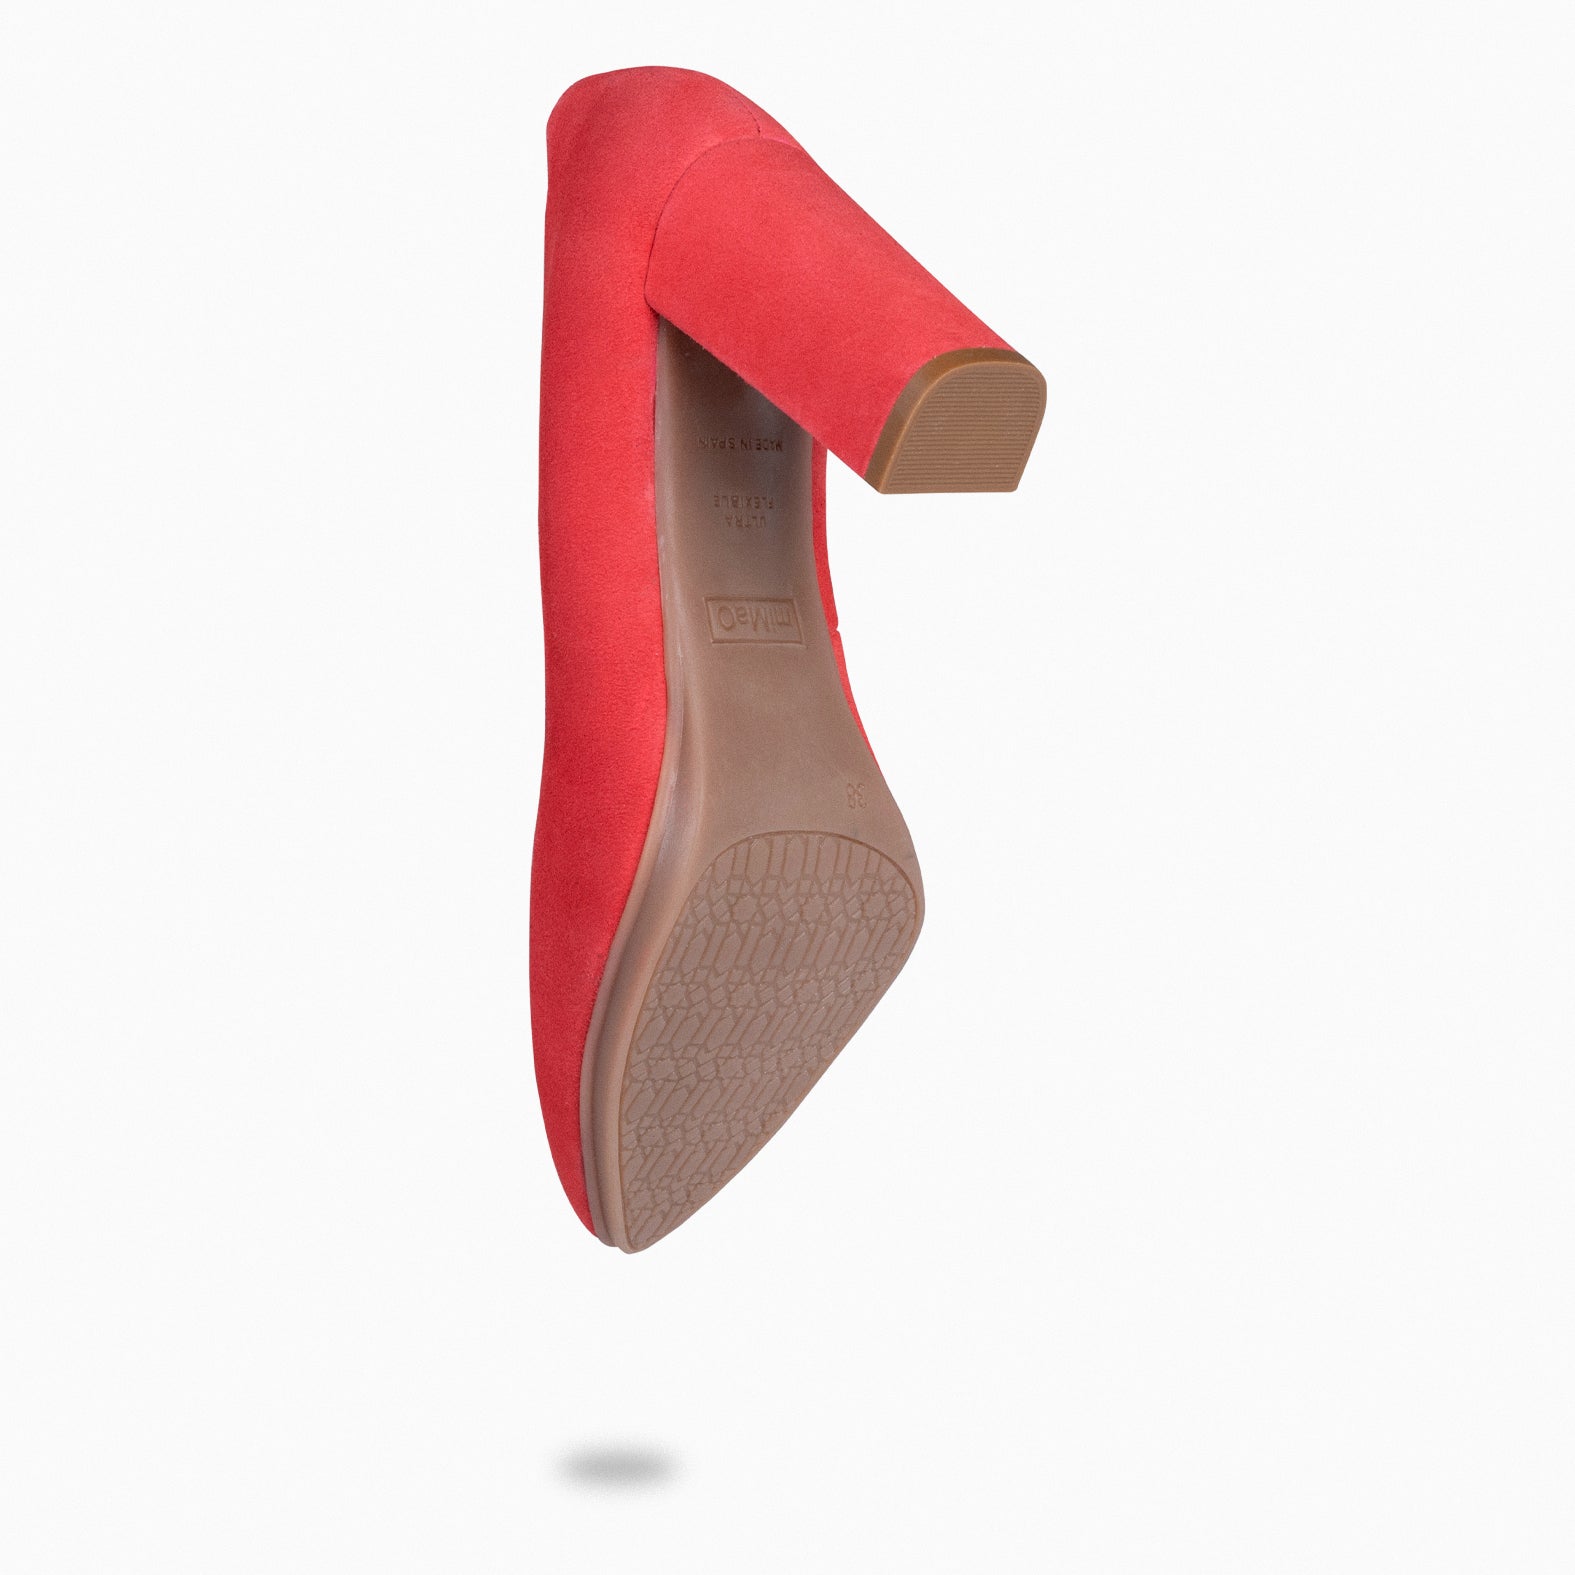 URBAN – RED Suede high-heeled shoes 